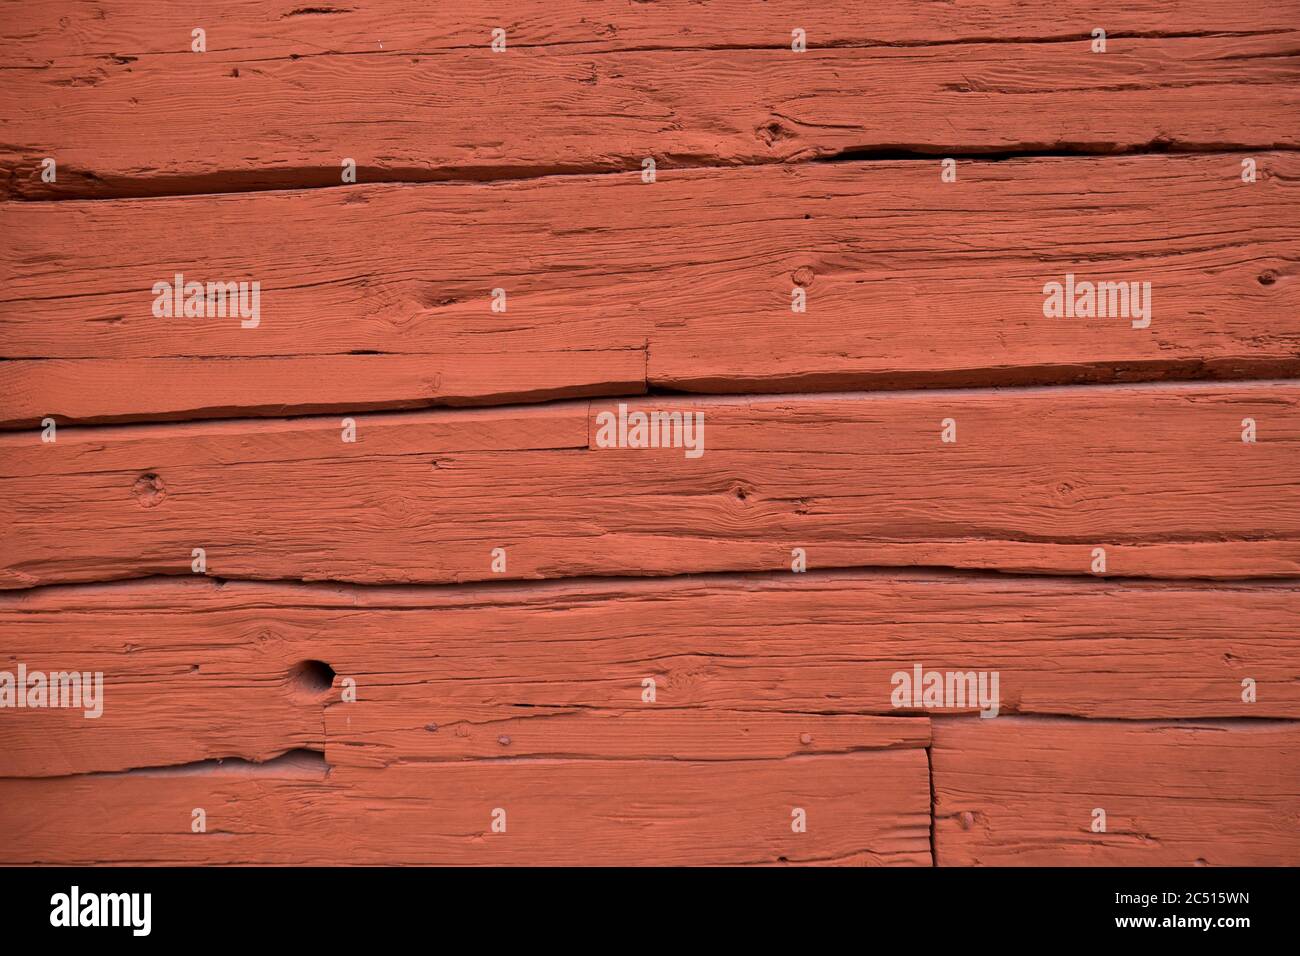 Wooden boards of a cottage with deep Falu red or falun red paint, well known for its use on wooden cottages and barns in Sweden and Finland Stock Photo